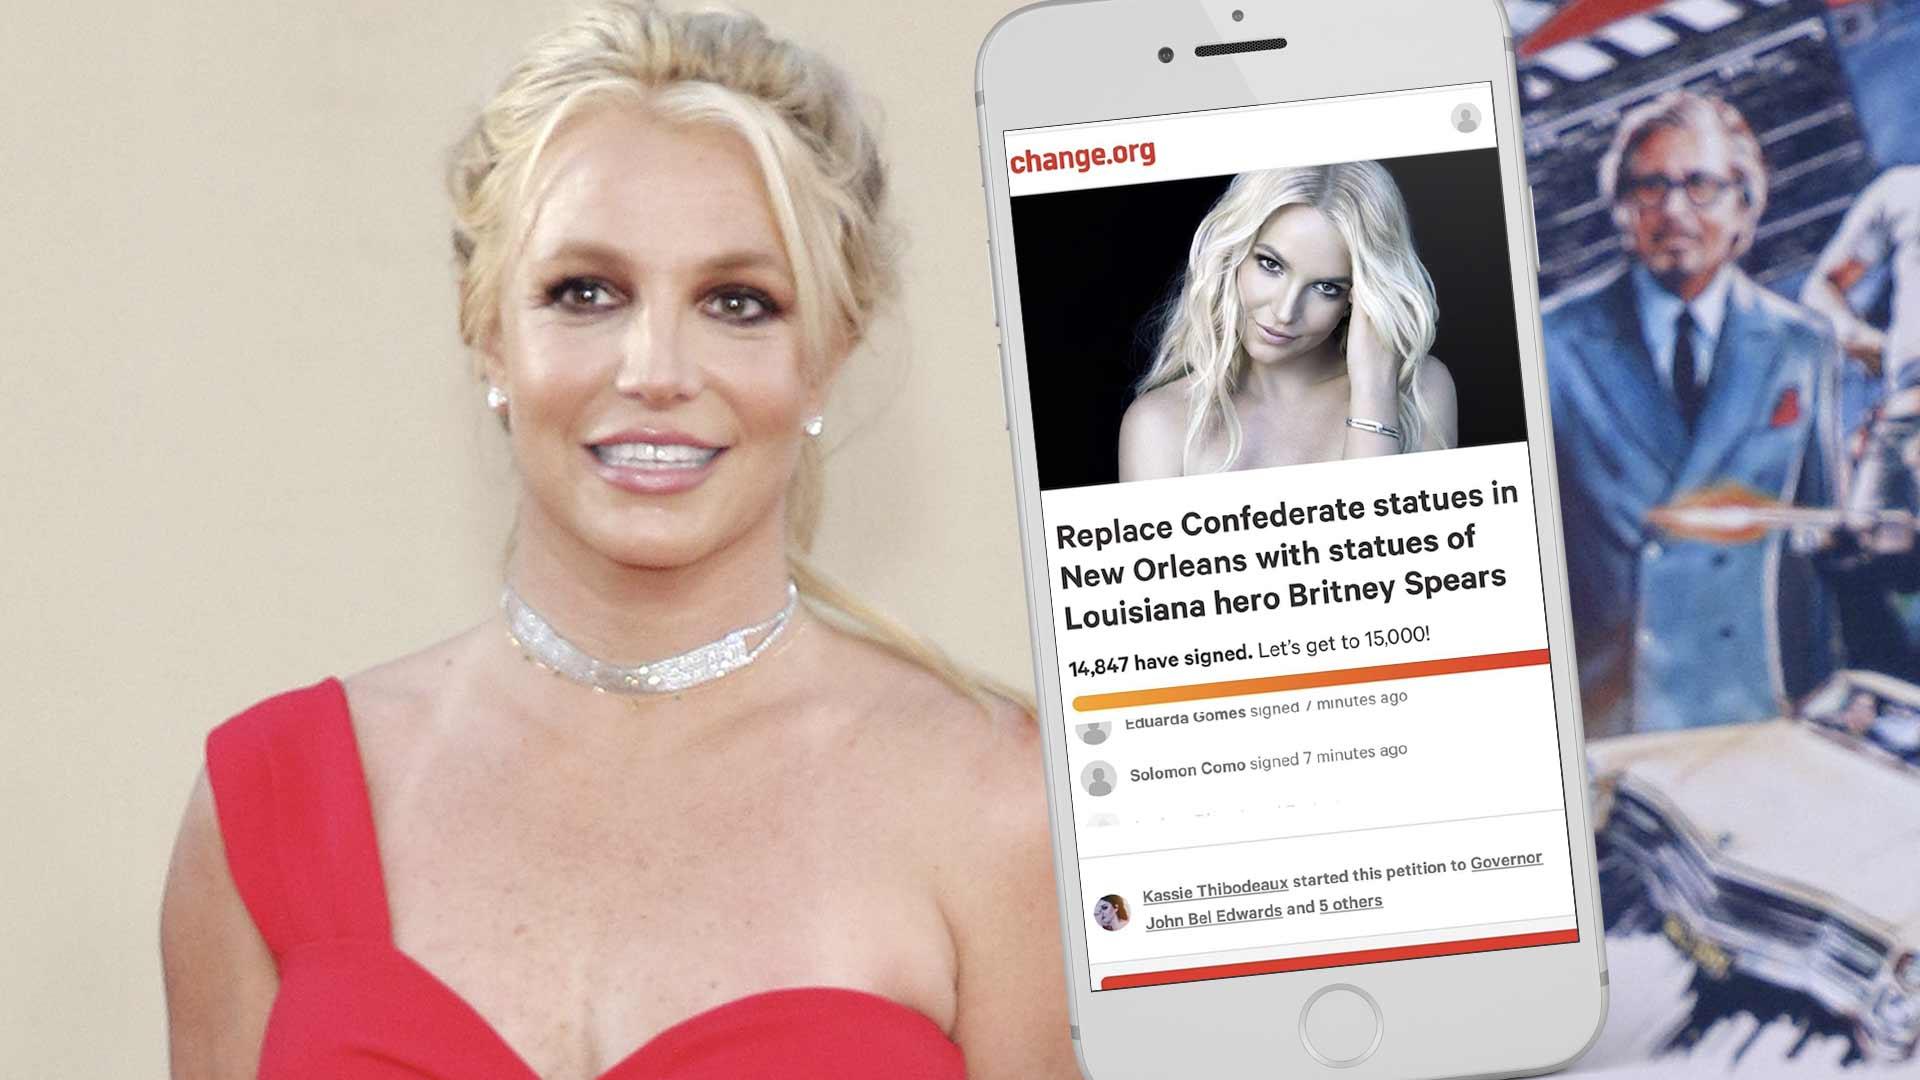 Britney Spears’ Fans Want Confederate Monuments Replaced With Statues Of Pop Princess